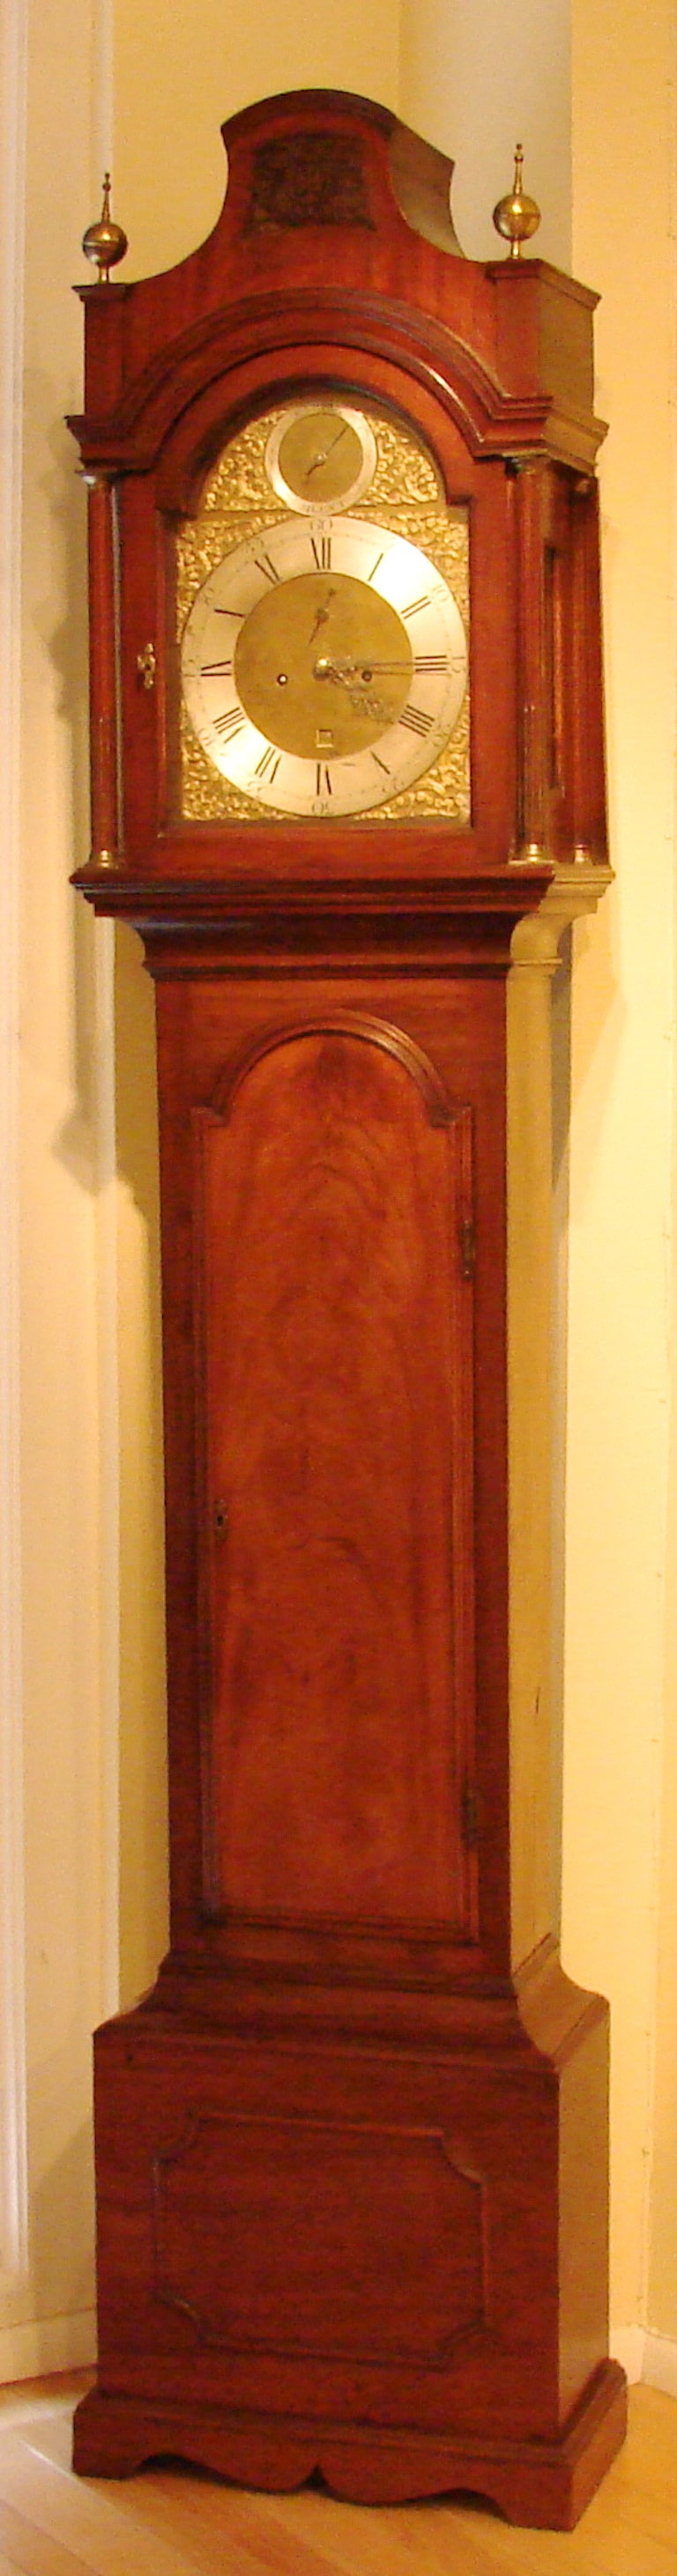 Late Georgian Mahogany 8 Day Tall Case Clock by Robt Newman